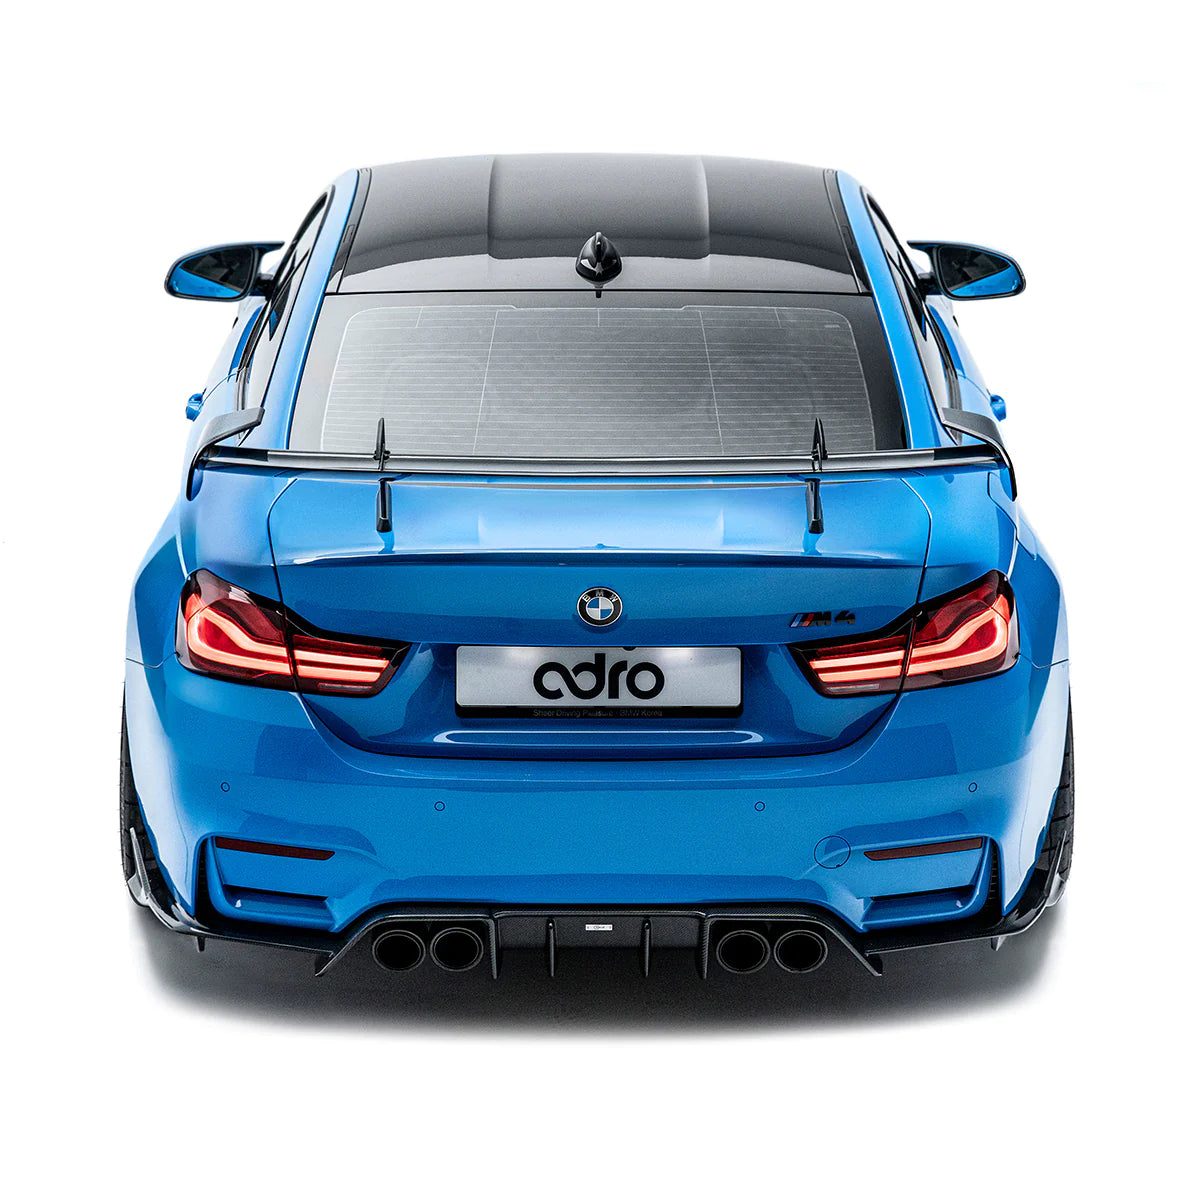 BMW M4 F82 Pre-Preg Carbon Fibre AT-R Swan Neck GT Rear Wing by Adro (2014-2020), Rear Wings, Adro - AUTOID | Premium Automotive Accessories